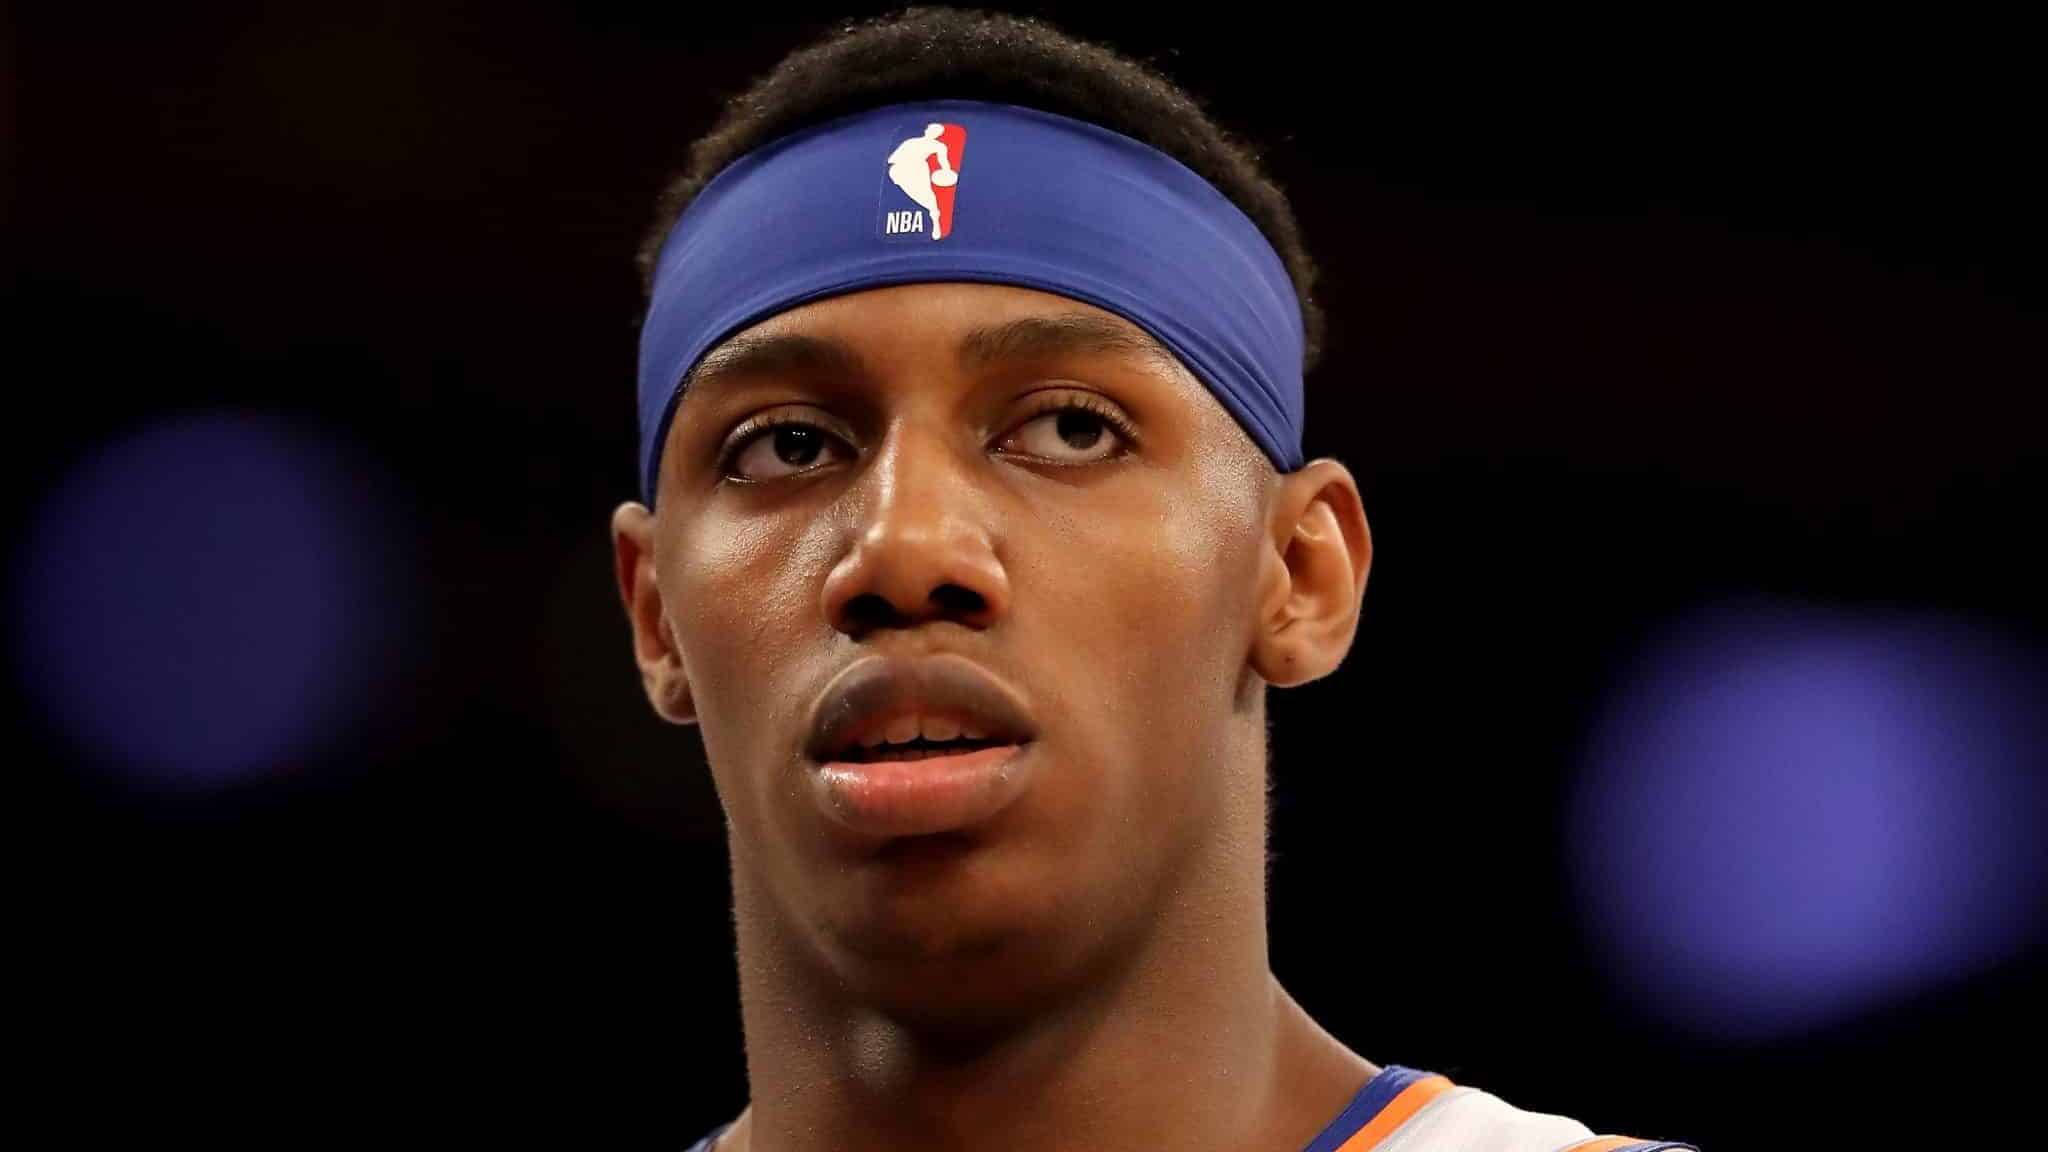 NEW YORK, NEW YORK - FEBRUARY 12: RJ Barrett #9 of the New York Knicks looks on in the second half against the Washington Wizards at Madison Square Garden on February 12, 2020 in New York City.The Washington Wizards defeated the New York Knicks 114-96. NOTE TO USER: User expressly acknowledges and agrees that, by downloading and or using this photograph, User is consenting to the terms and conditions of the Getty Images License Agreement.